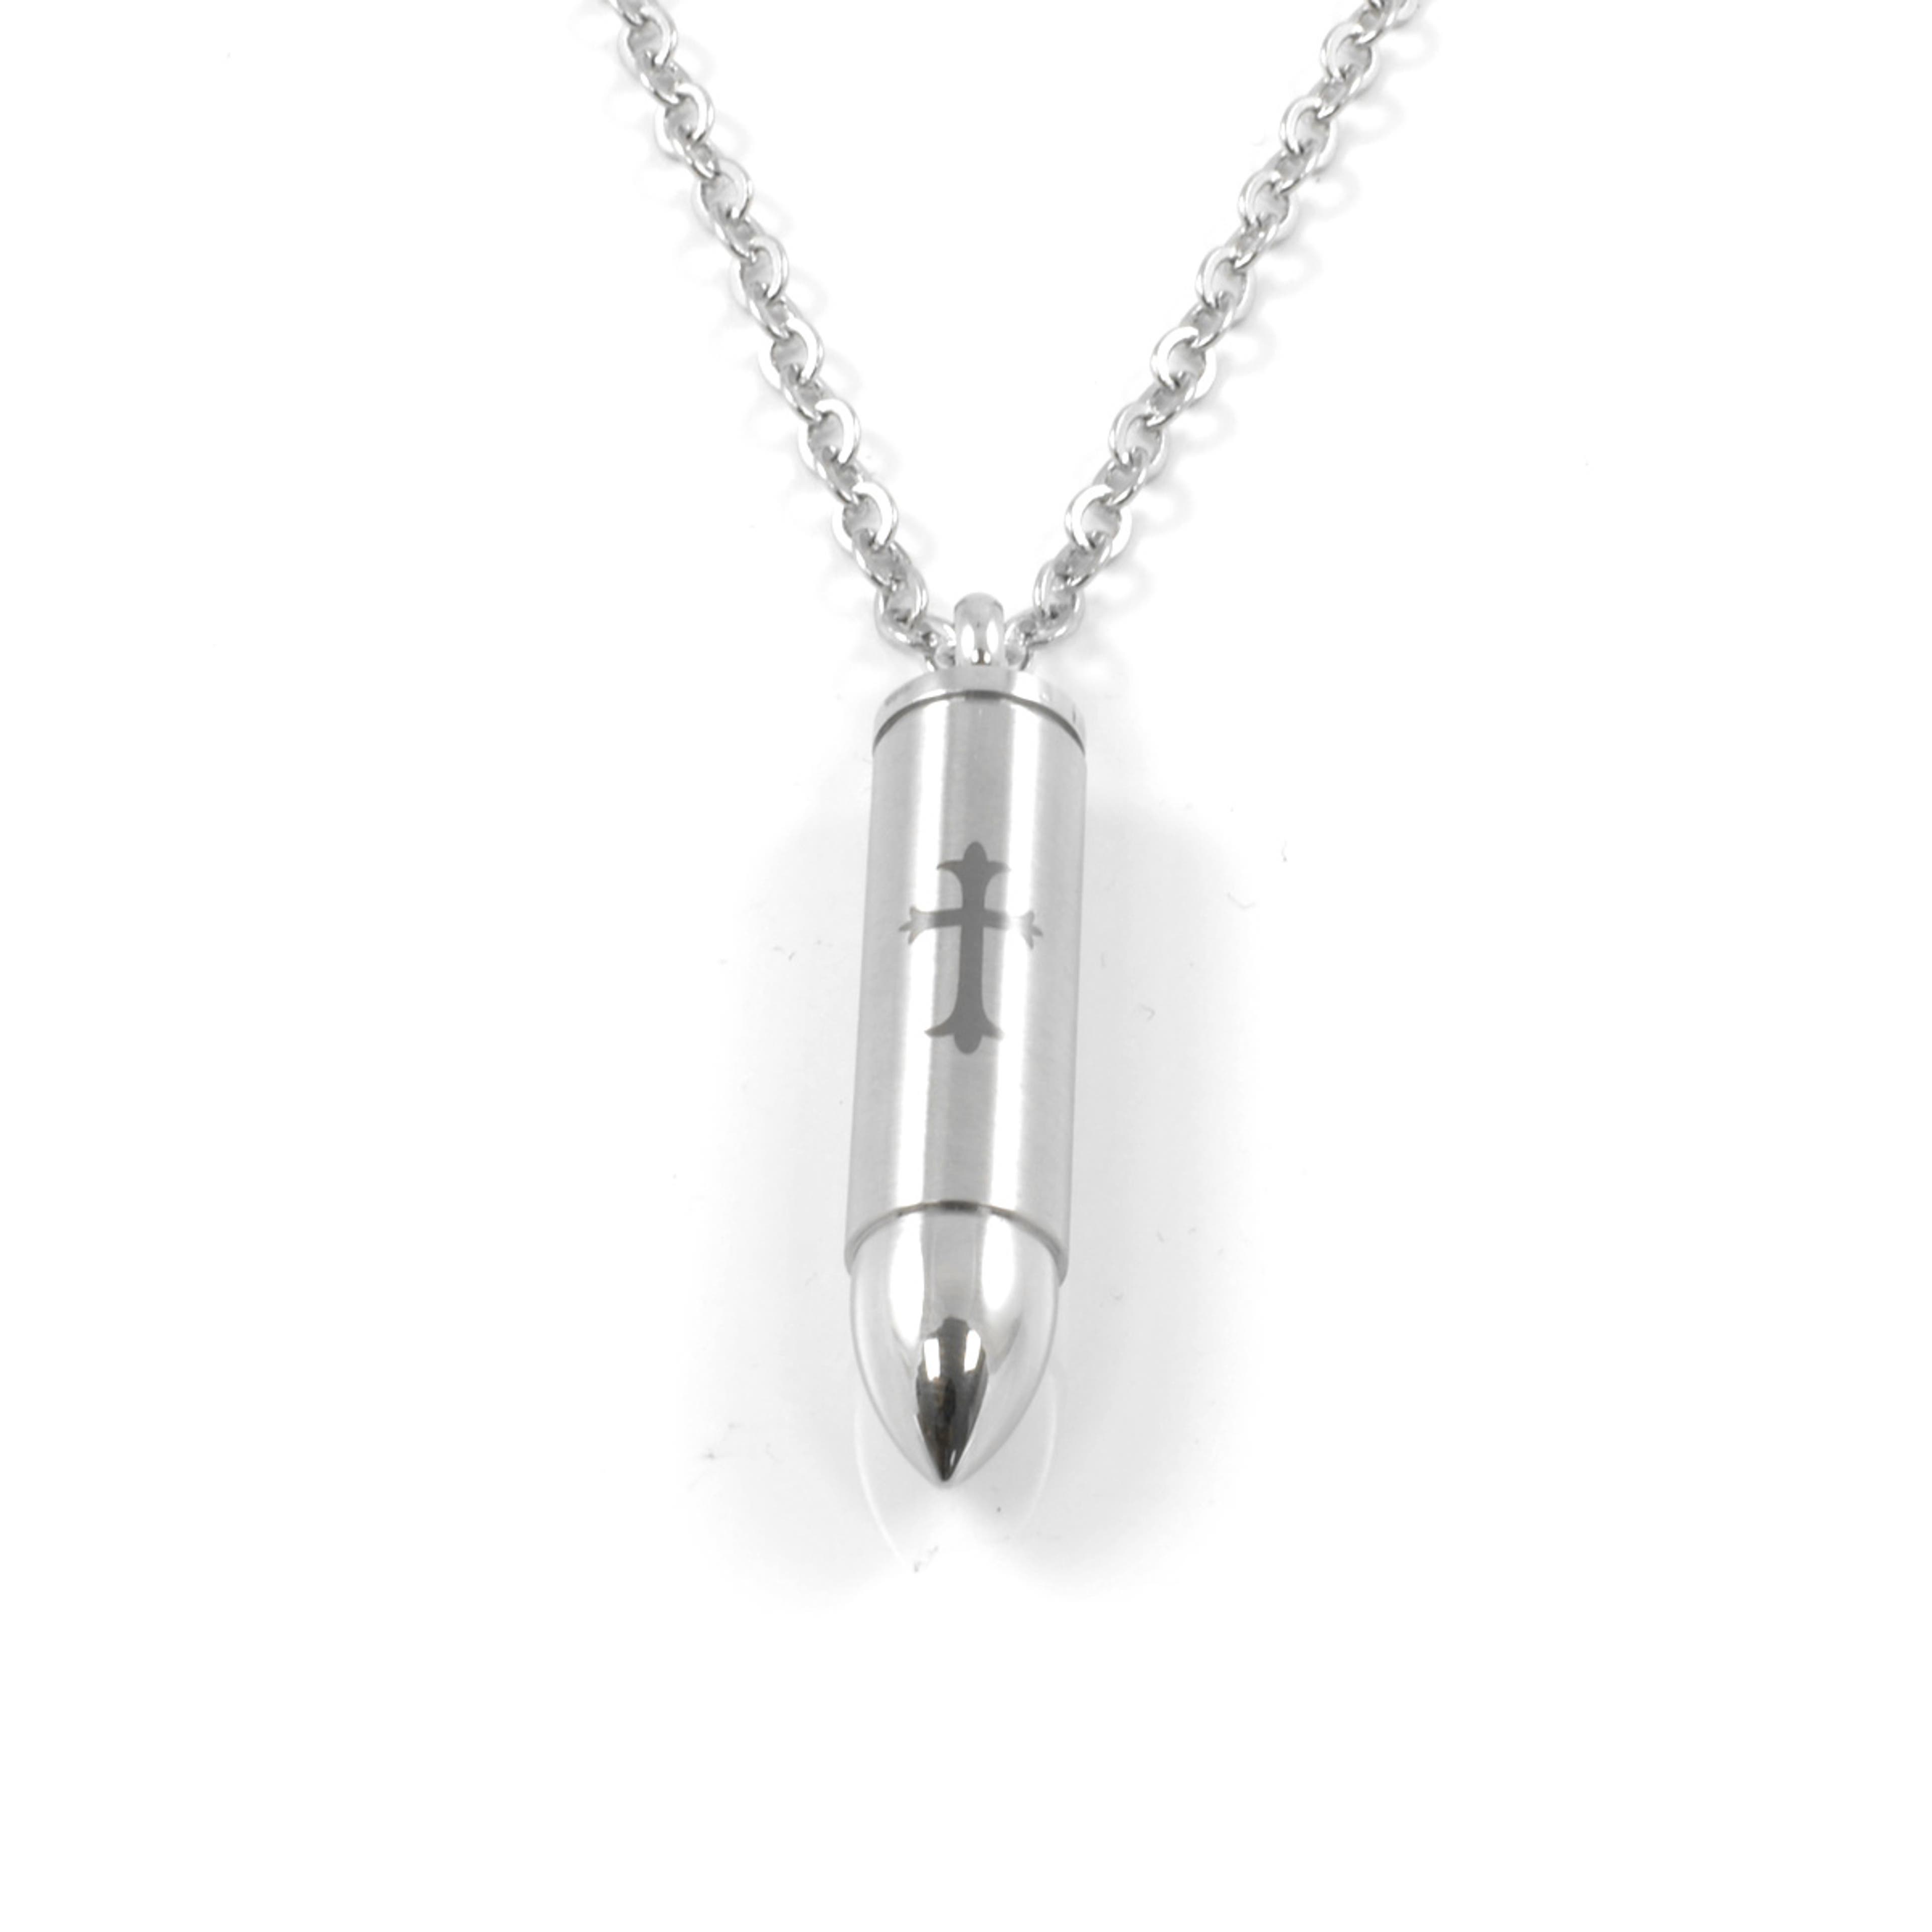 Silver-Tone Stainless Steel Secret Compartment with Cross Cable Chain Necklace